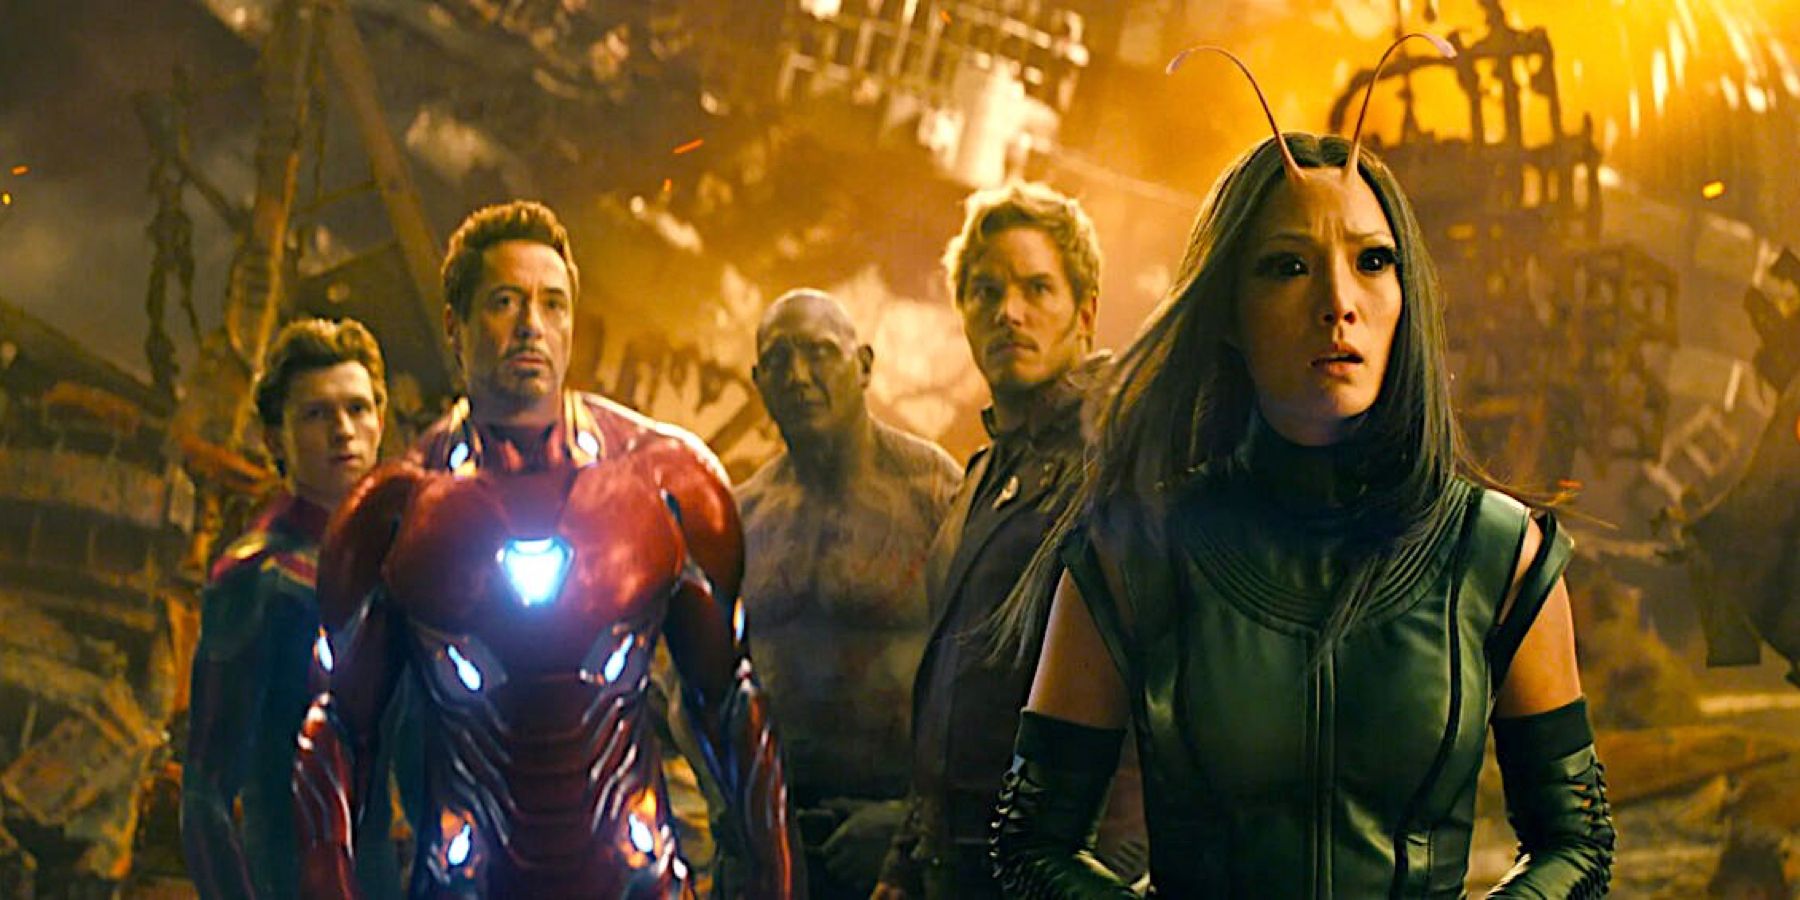 Spider-Man (Tom Holland), Iron Man (Robert Downey Jr.), Drax (Dave Bautista), Star-Lord (Chris Pratt), and Mantis (Pom Klementieff), look wary on the surface of the planet Titan in Avengers: Infinity War.